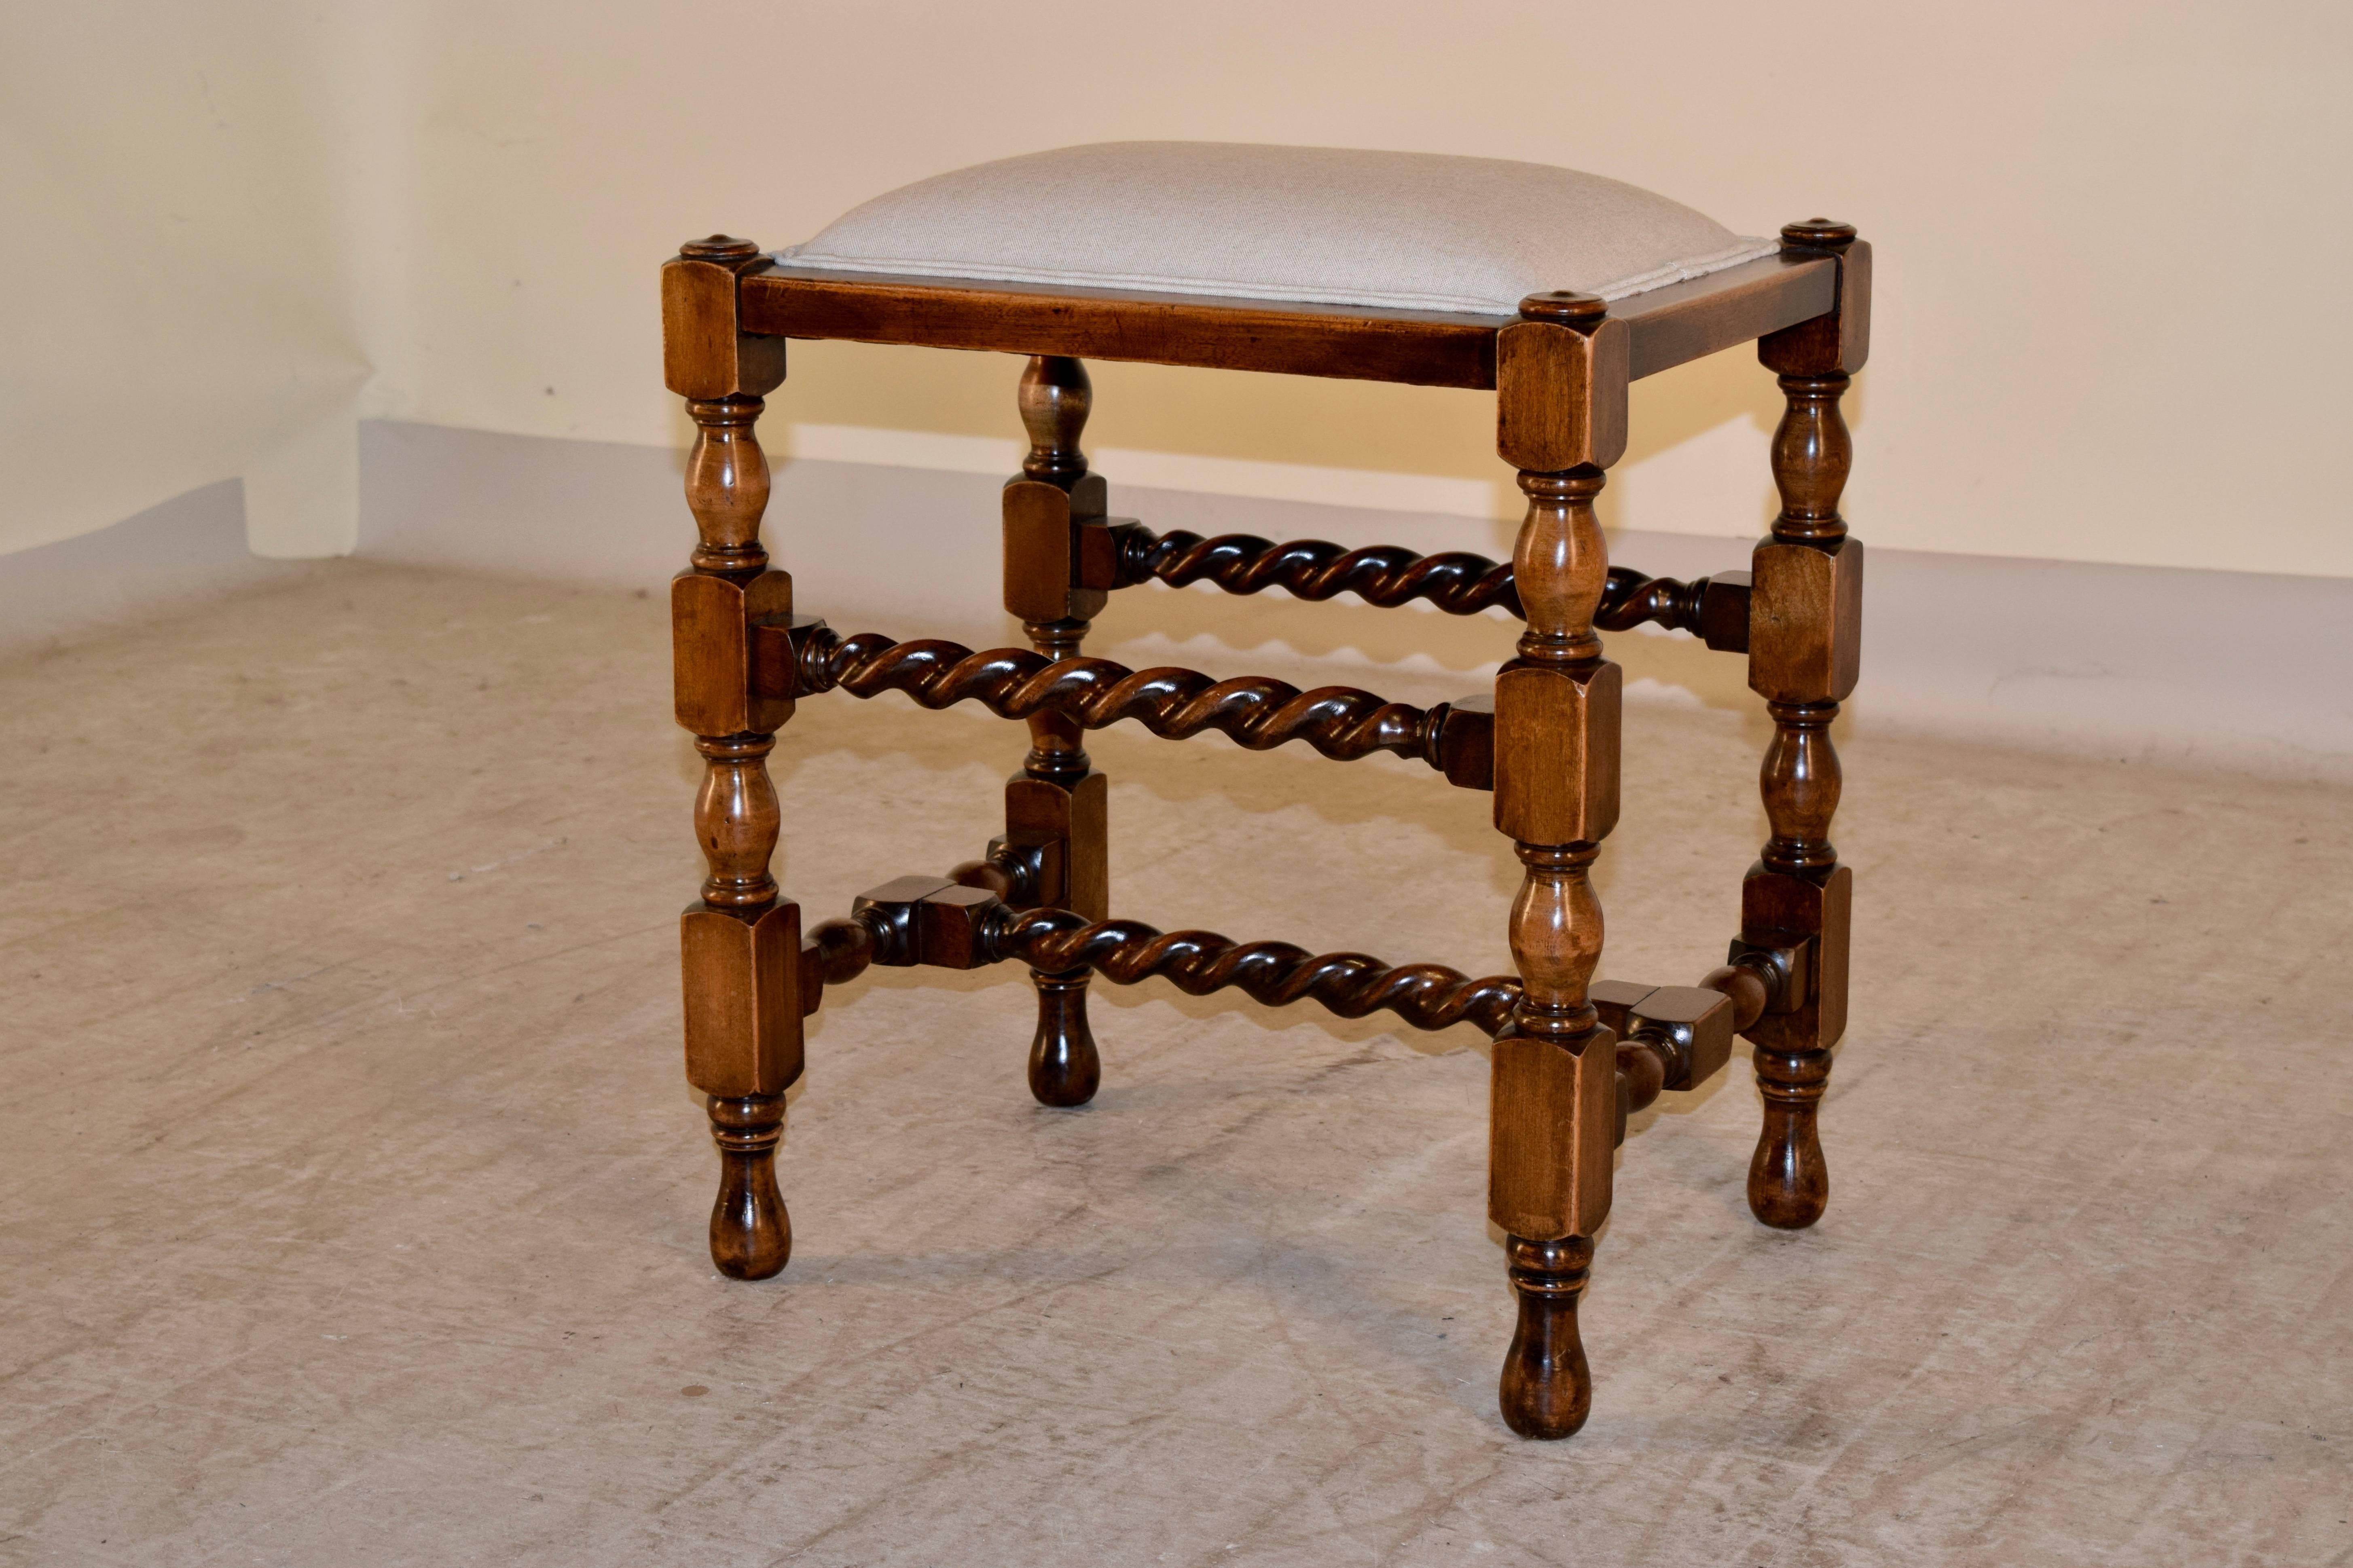 19th century English oak turned stool with a newly upholstered linen seat finished with a double welt. The legs are hand-turned, and are joined by barley twist turned stretchers. Supported on turned feet.